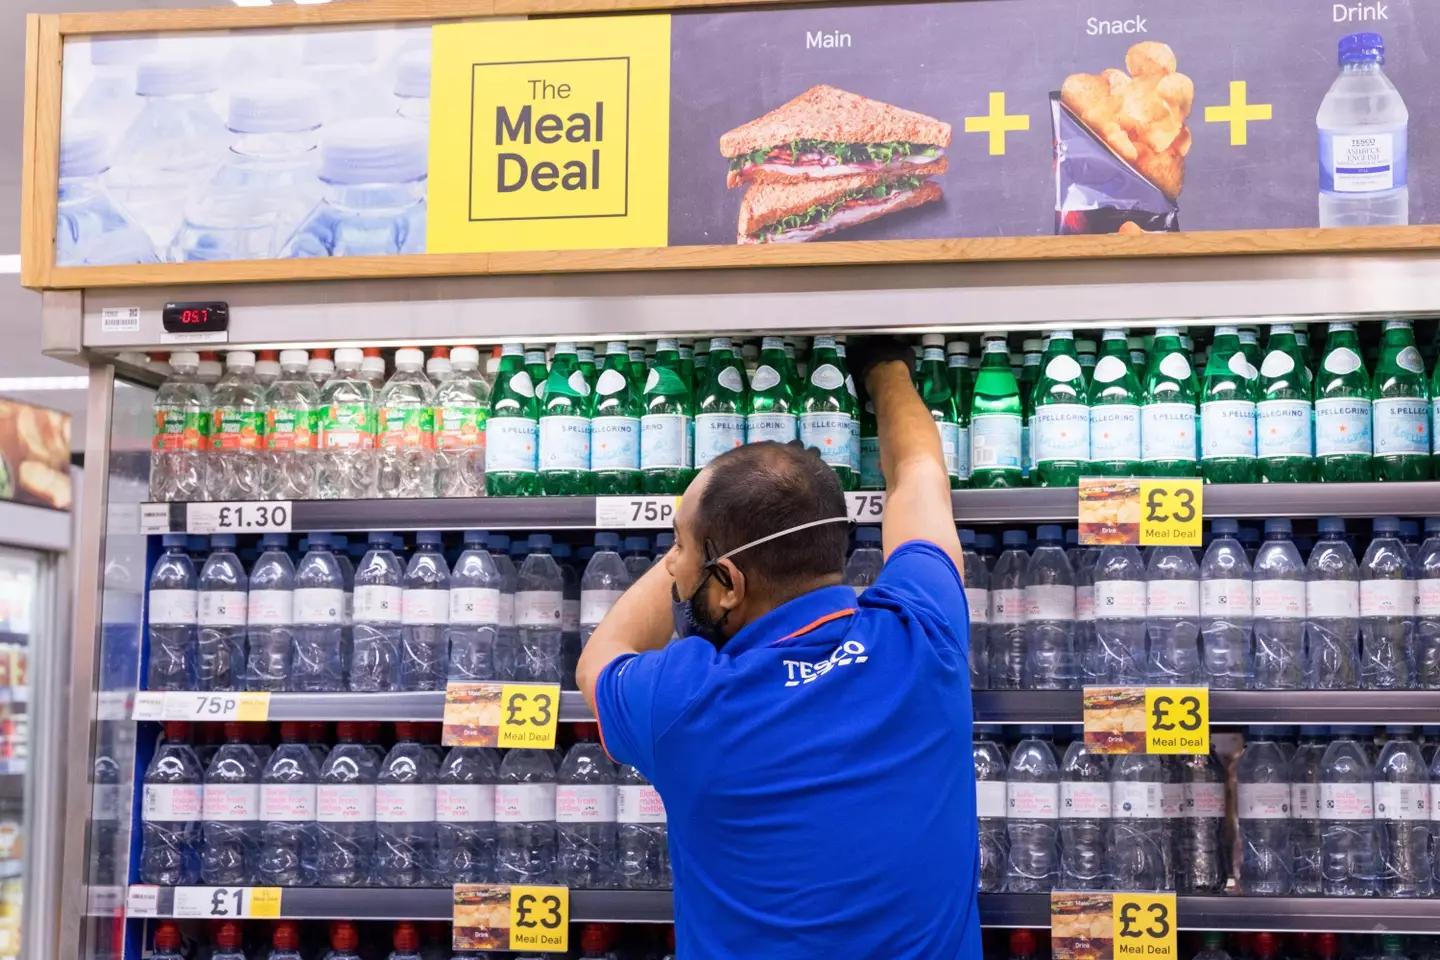 Later this month, Tesco will raise the cost of its Meal Deal for the first time in a decade.